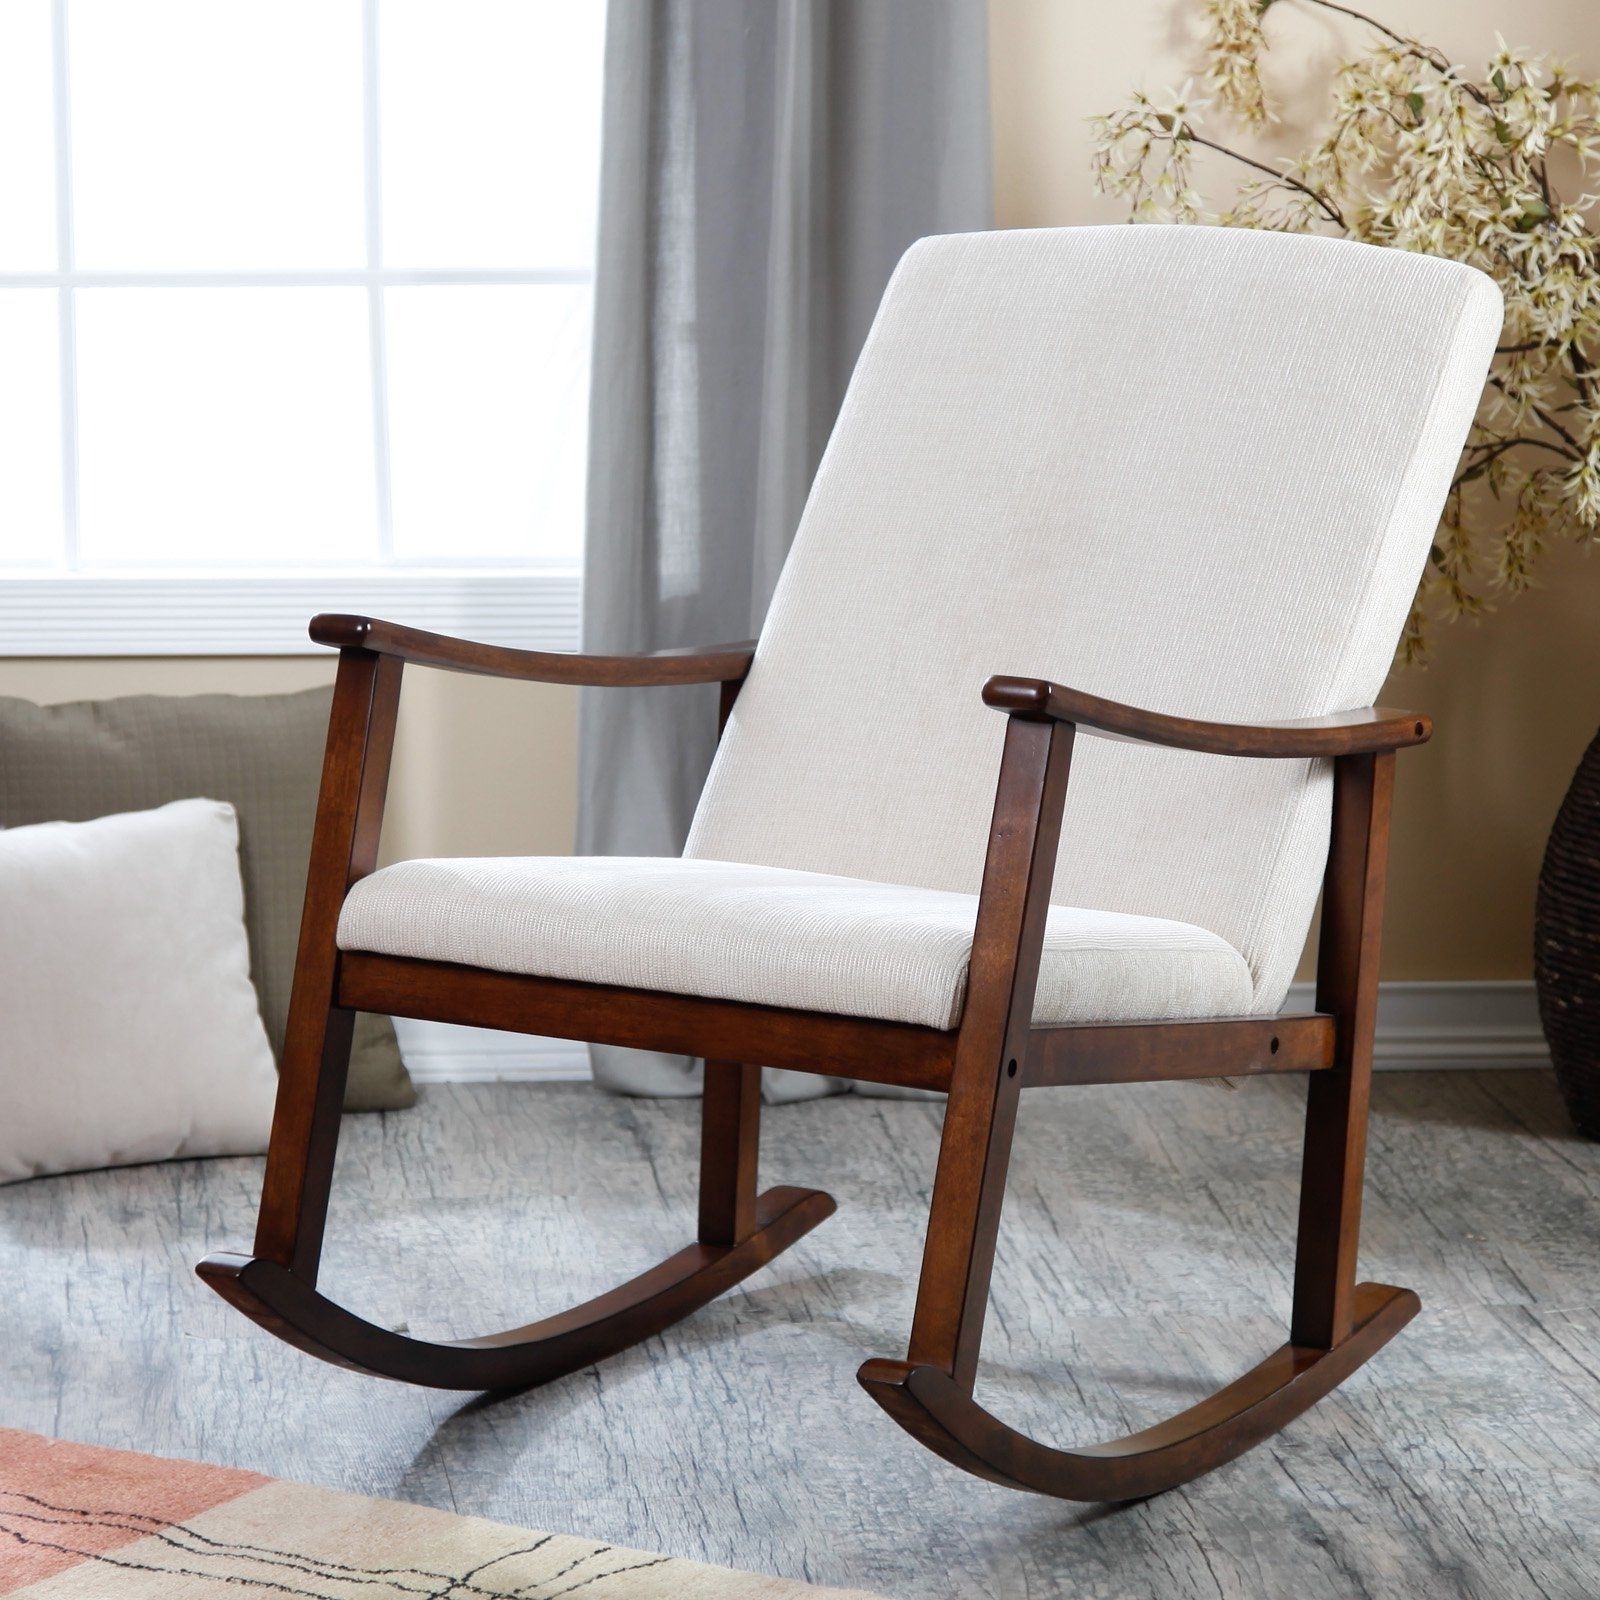 nursing chairs for small rooms